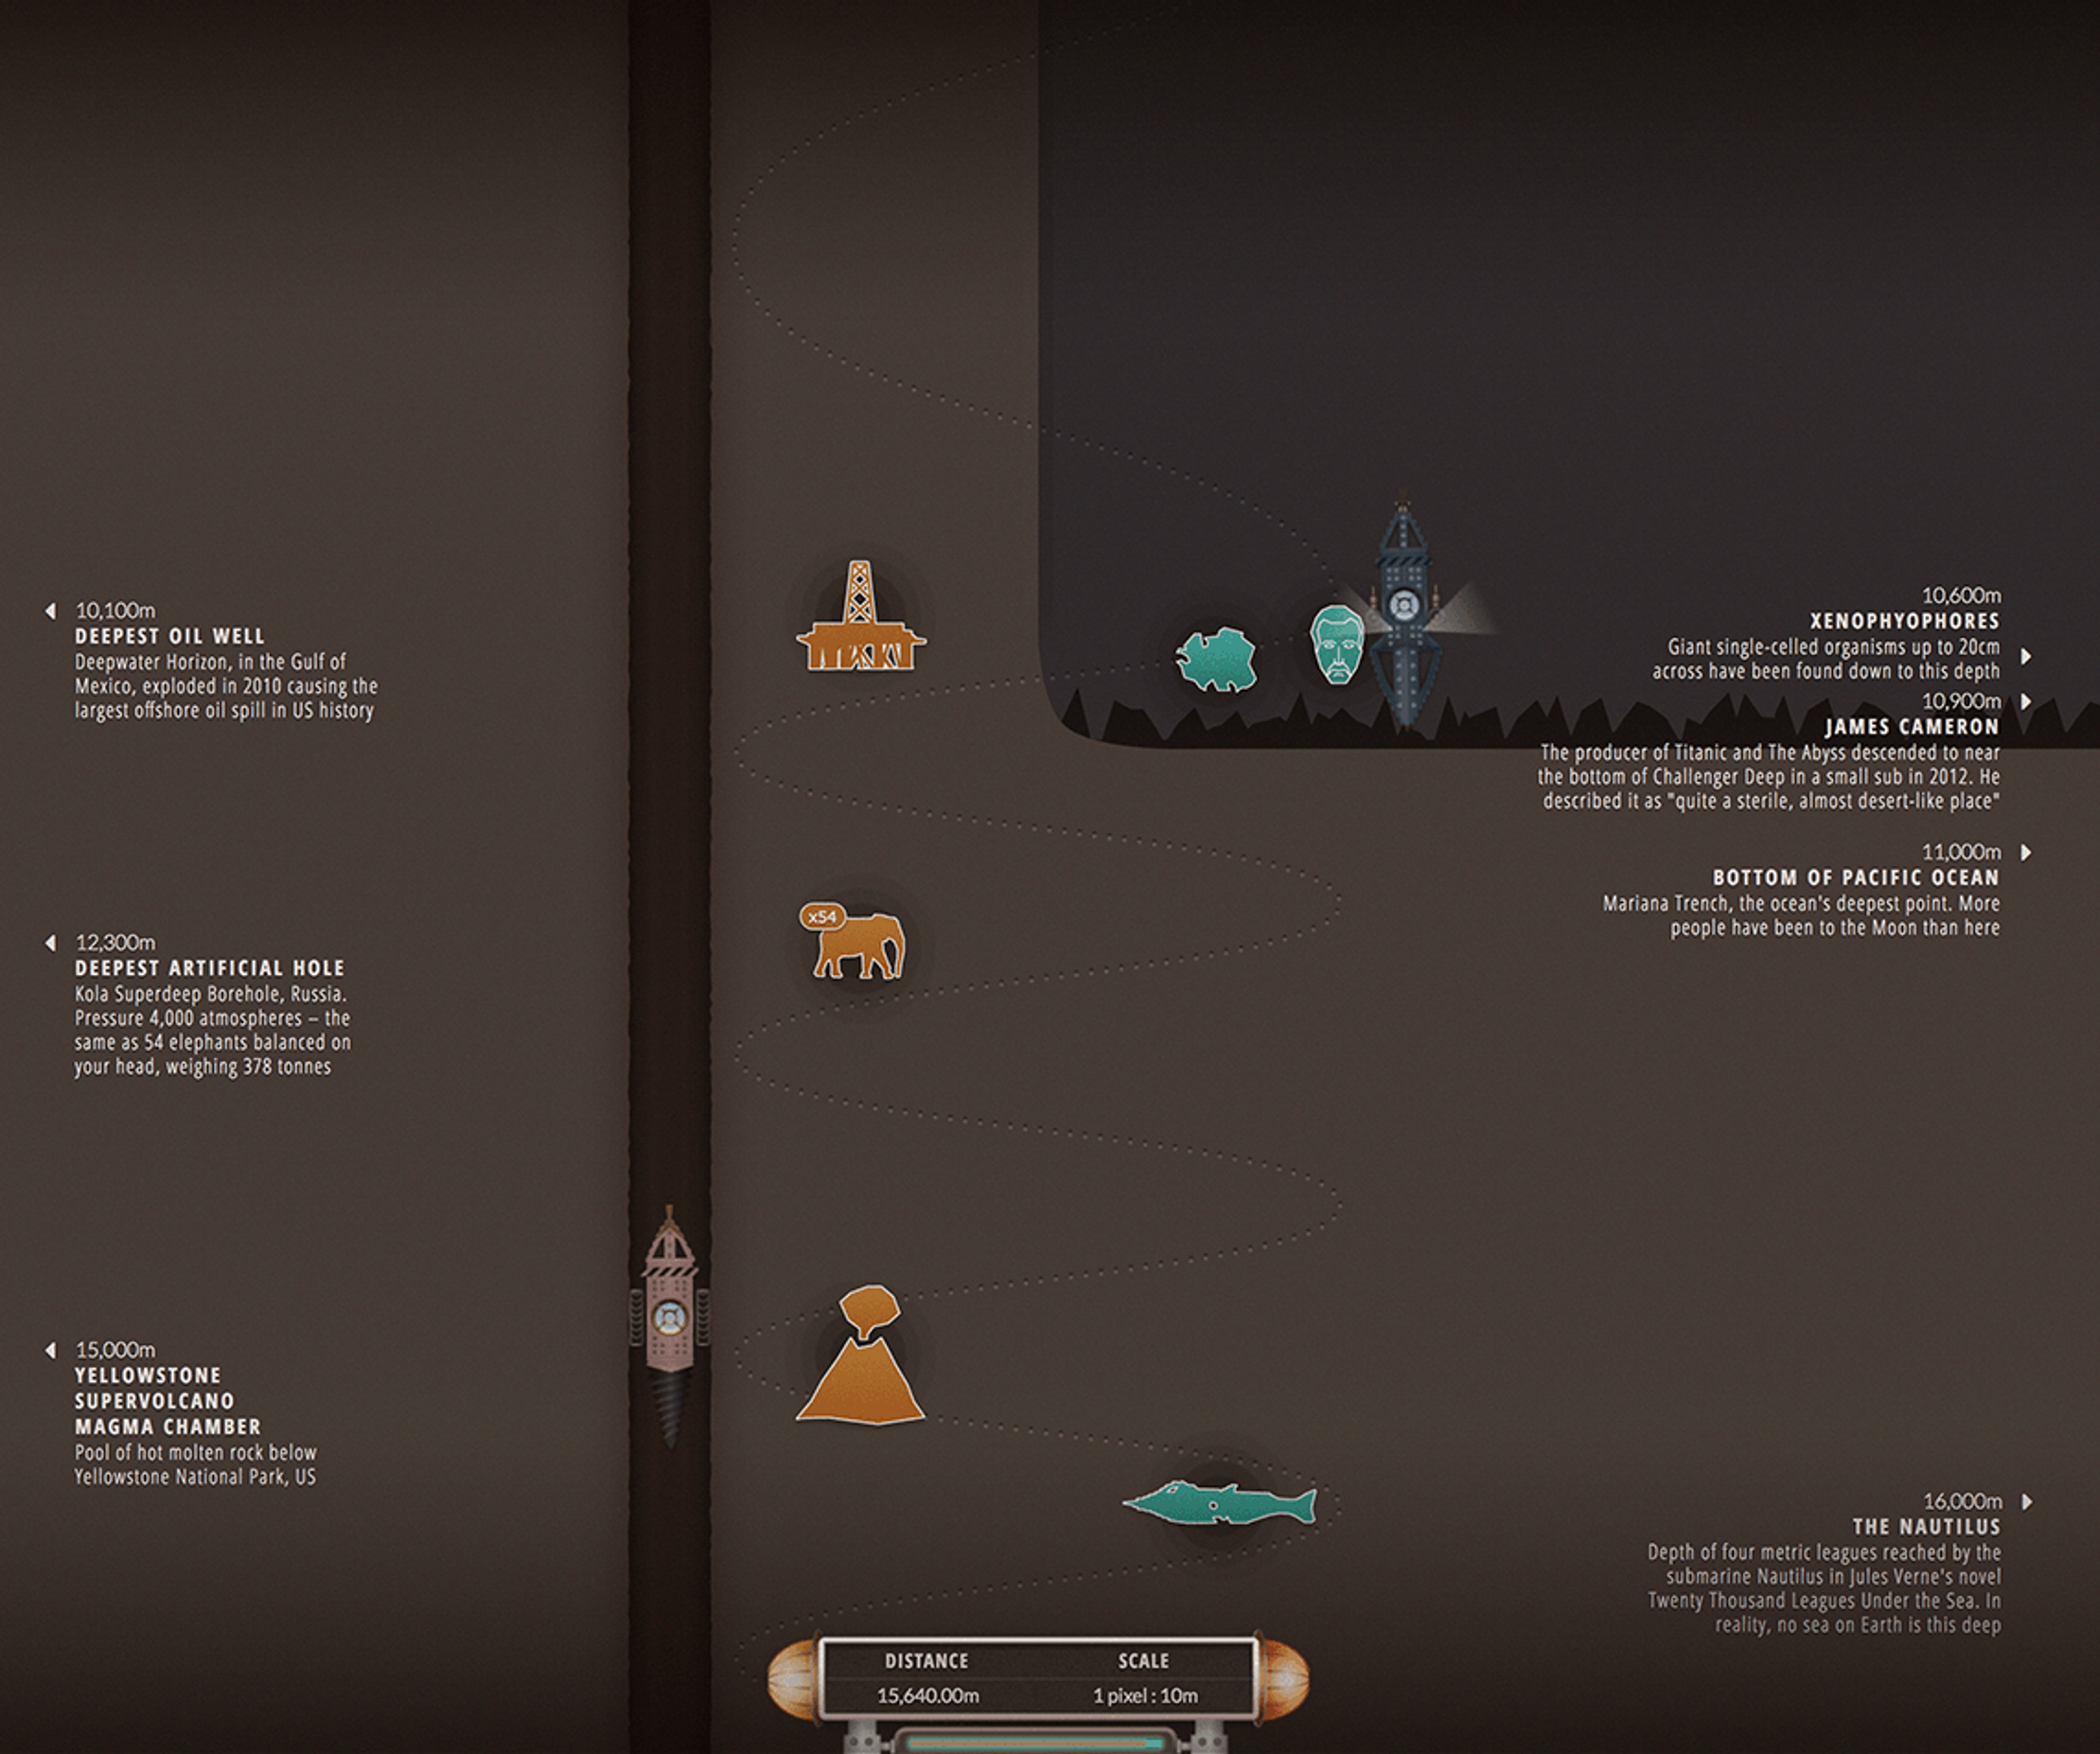 A screenshot from the 'Journey to the Centre of the Earth' page. The page is split in half between ground and ocean. An underground drill explorer buries deeper below the ground as the ocean explorer bottoms out at the deepest point in the ocean.